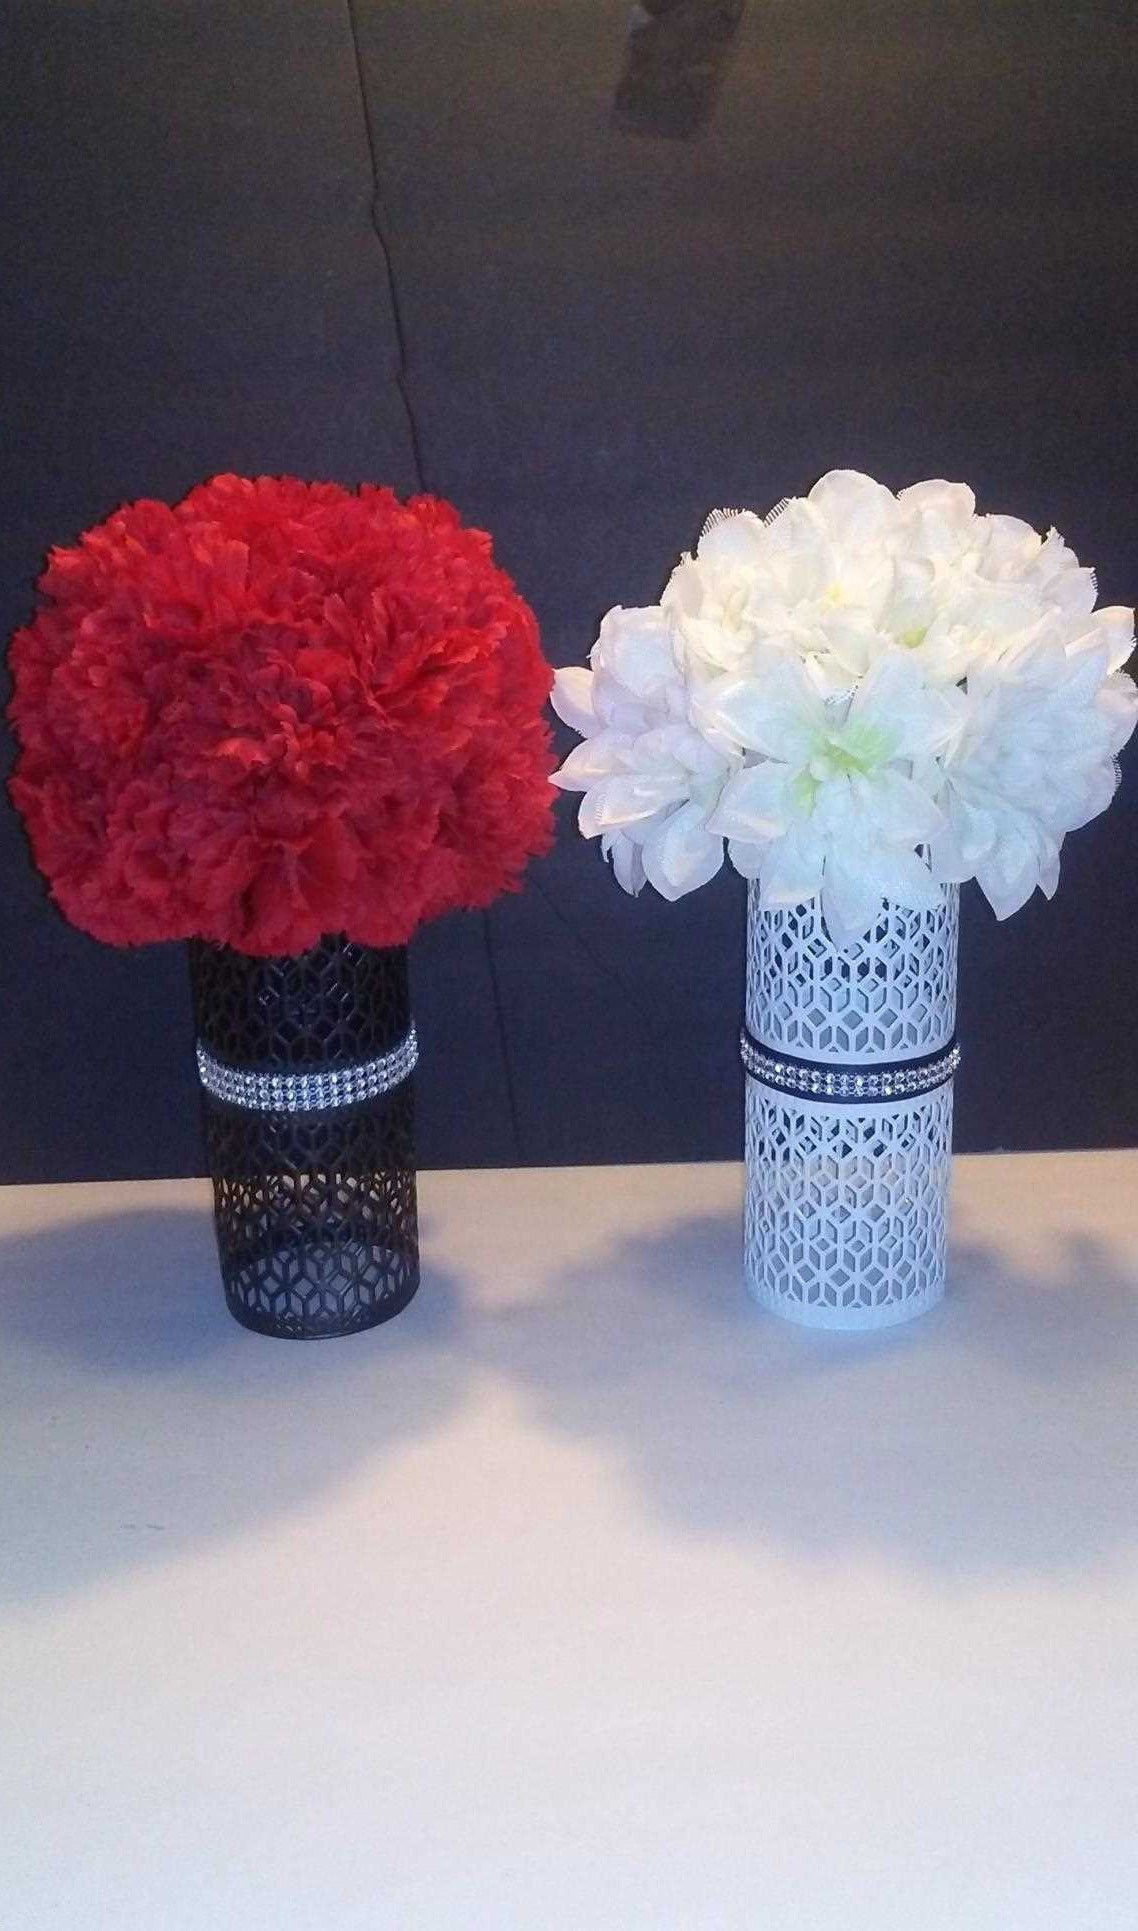 13 Lovely Discount Bud Vases 2024 free download discount bud vases of hydrangea decorations wedding unique cool wedding ideas as for h with regard to hydrangea decorations wedding inspirational 26 luxury wedding centerpieces ideas of hydr